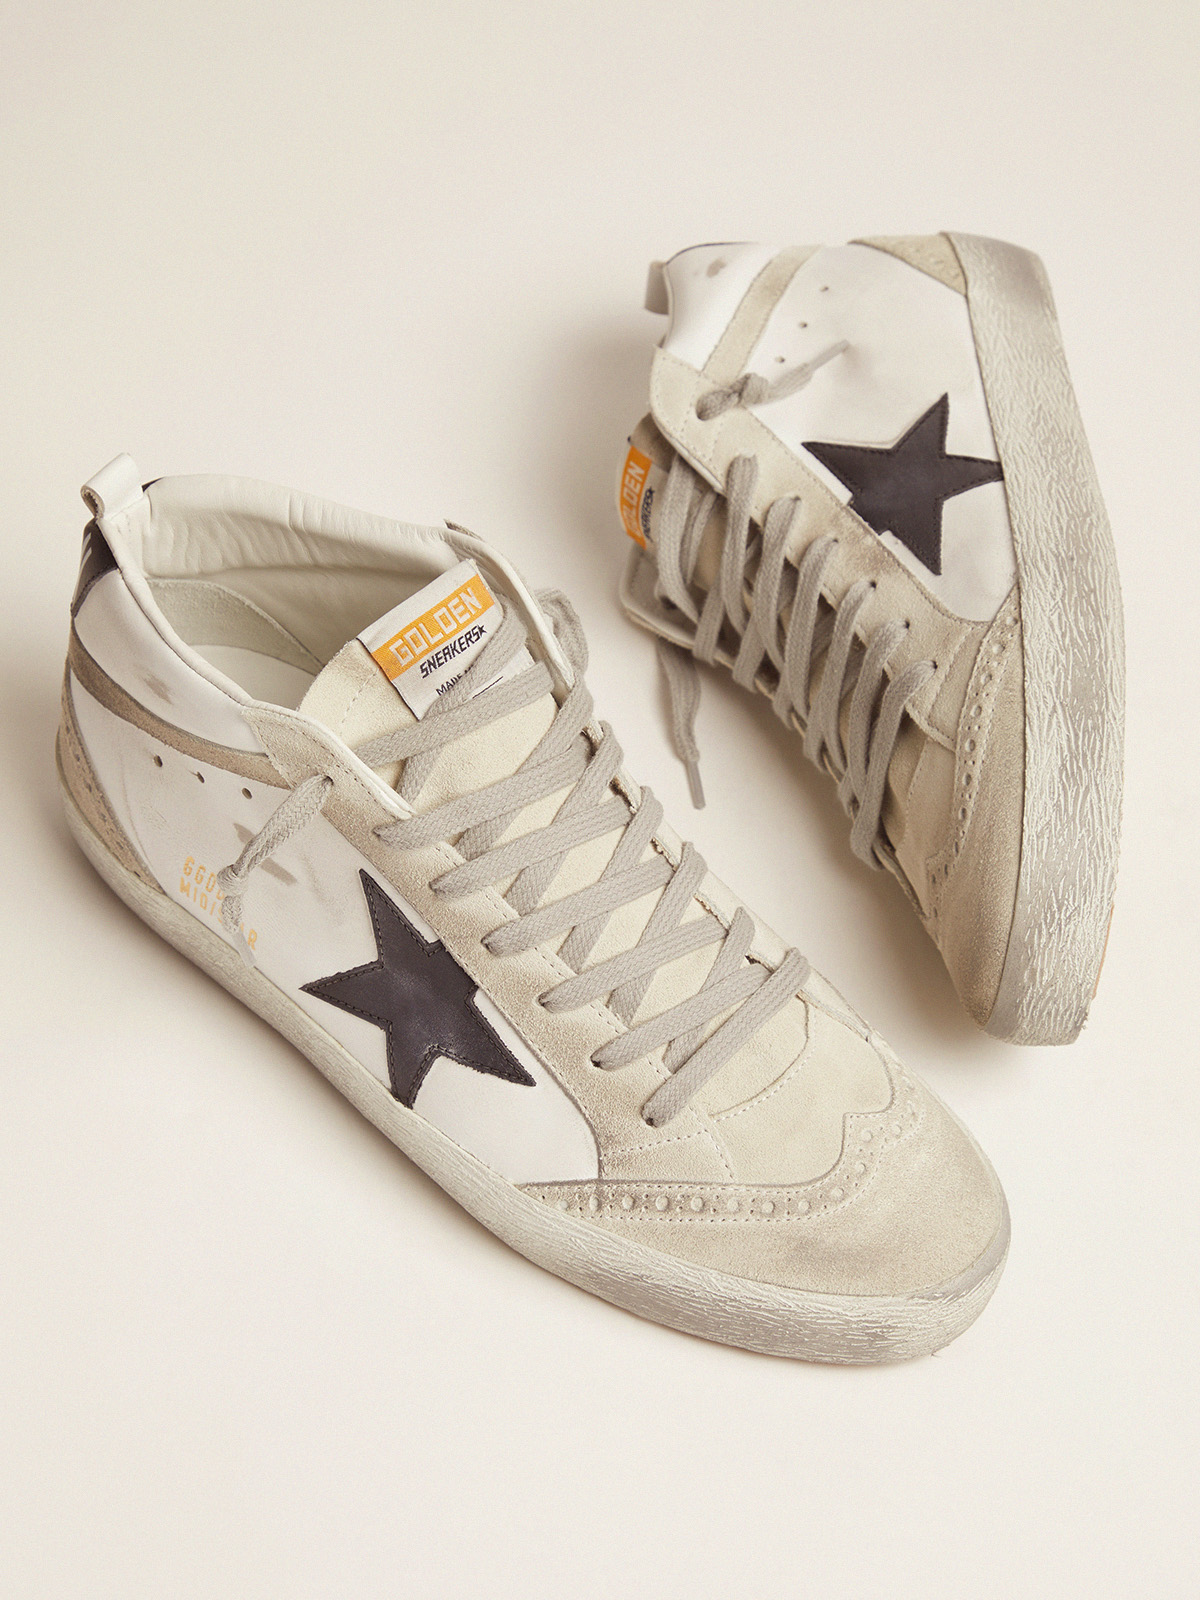 Black and white Mid Star sneakers | Golden Goose